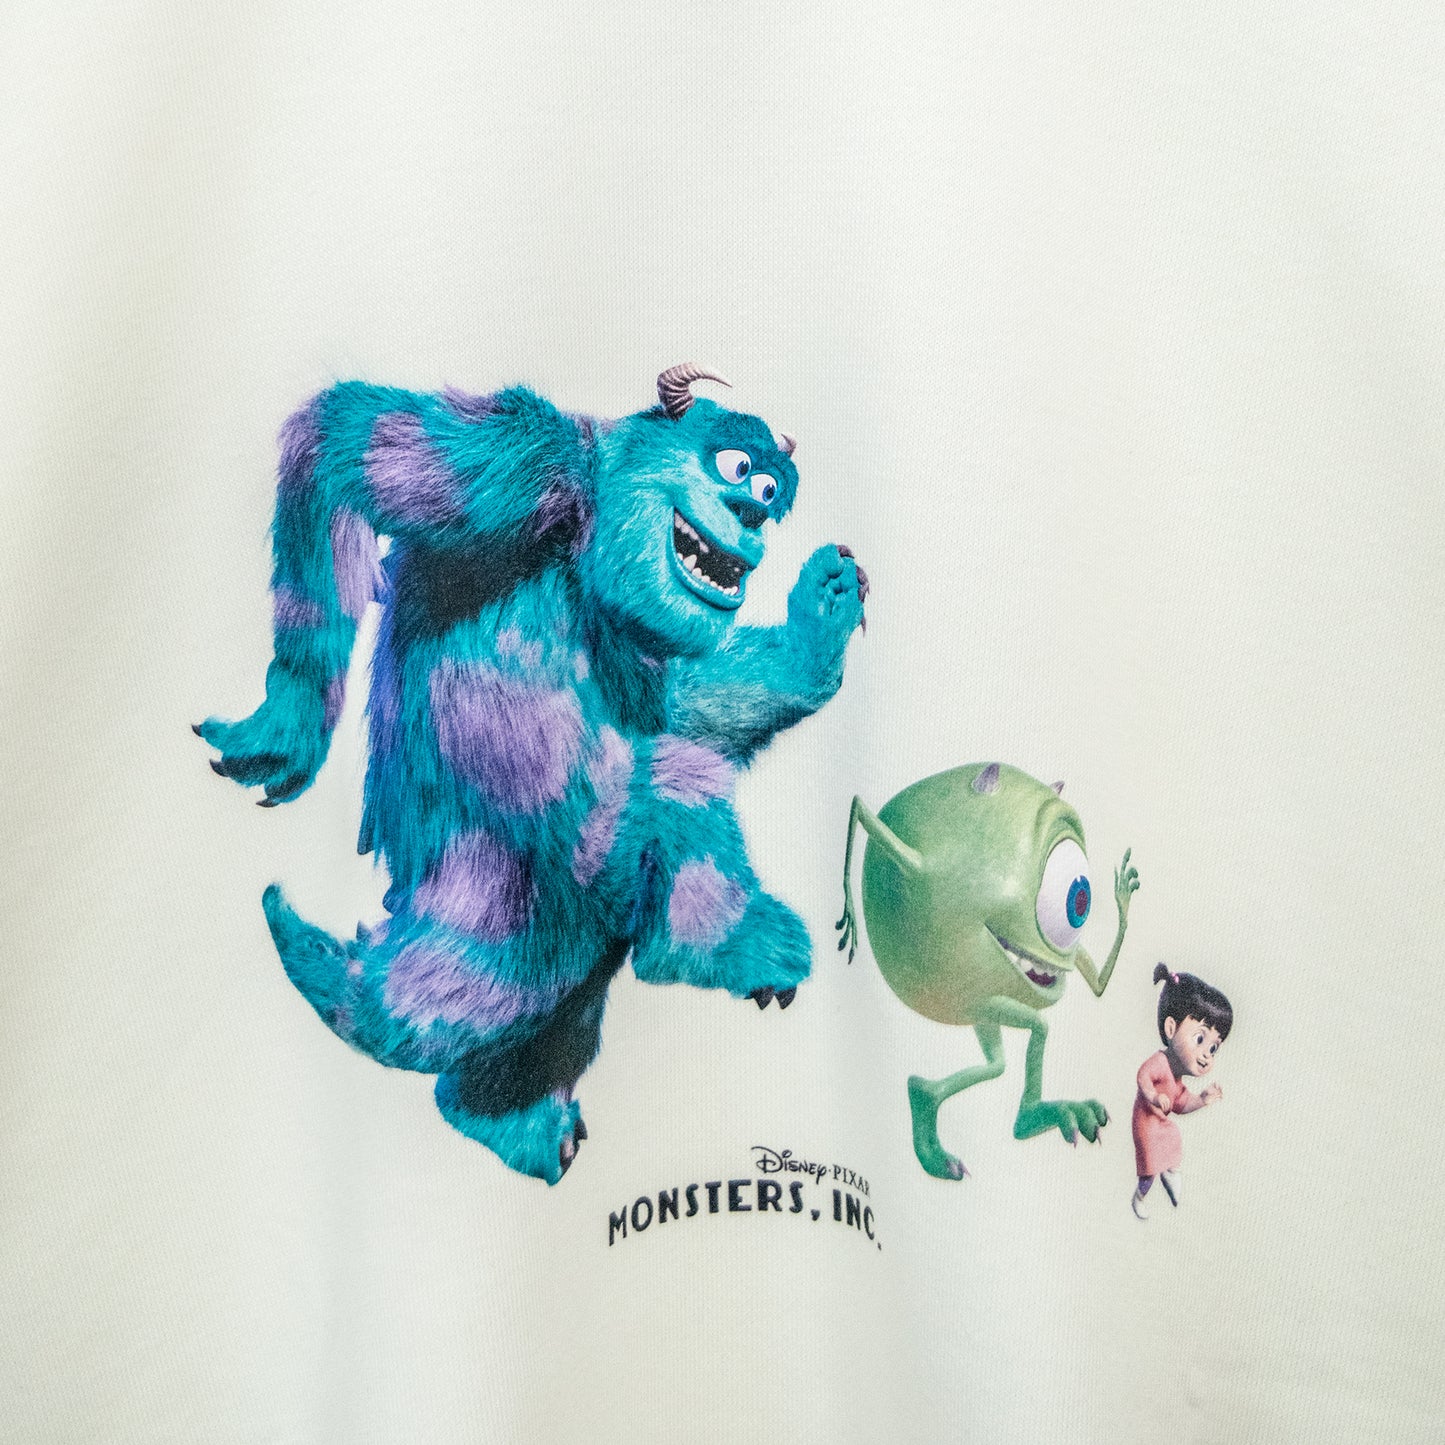 Monsters, Inc. Character Print Sweat Top WHITE